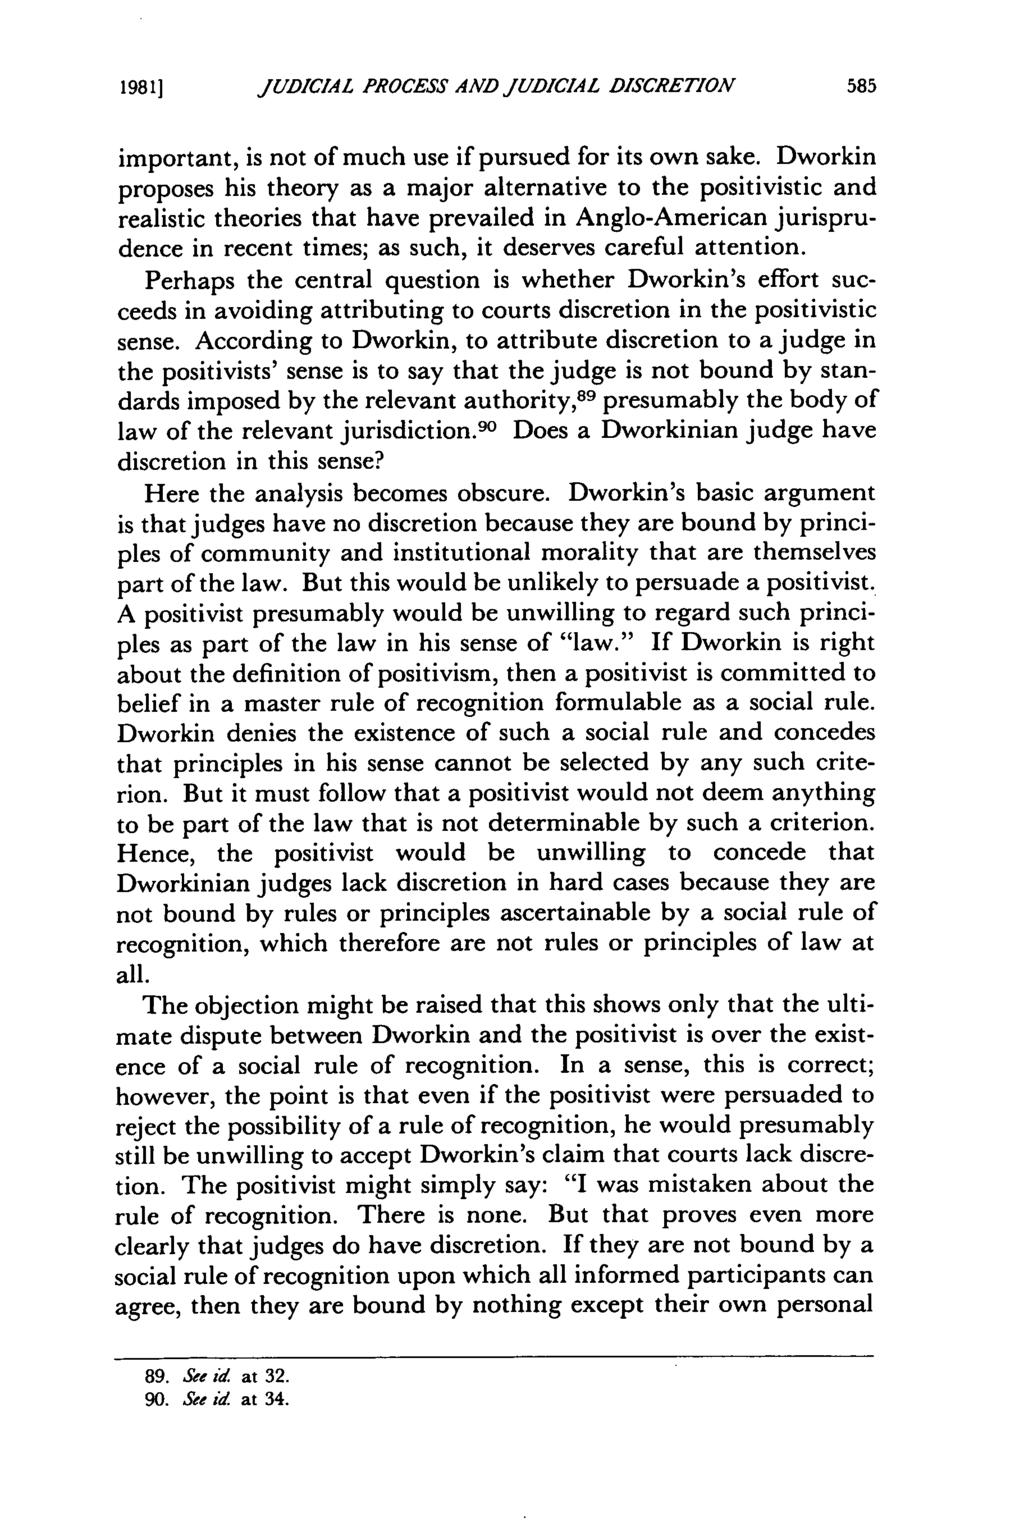 1981] Pannier: The Nature of the Judicial Process and Judicial Discretion JUDICIAL PROCESS AND JUDICIAL DISCRETION important, is not of much use if pursued for its own sake.